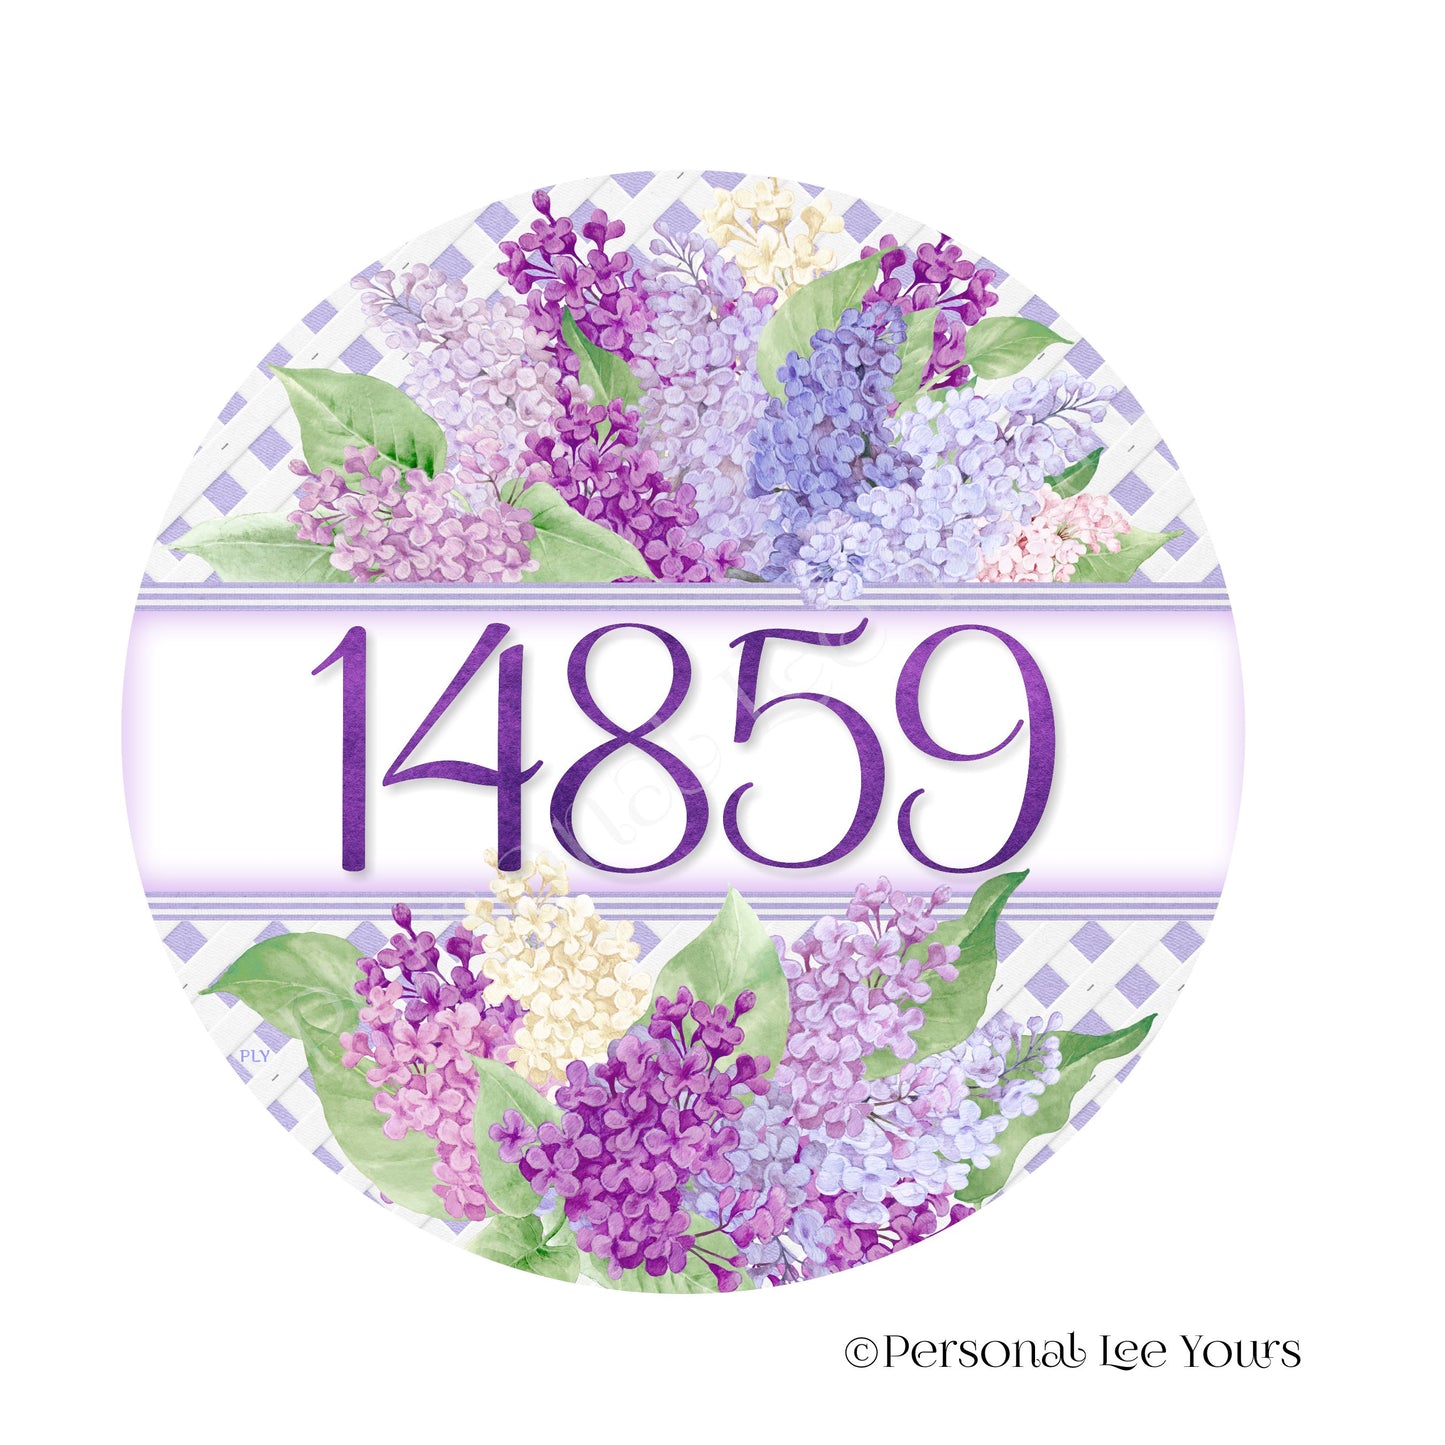 Personalized Wreath Sign * Loving The Lilacs * Your House Number * Round * Lightweight Metal